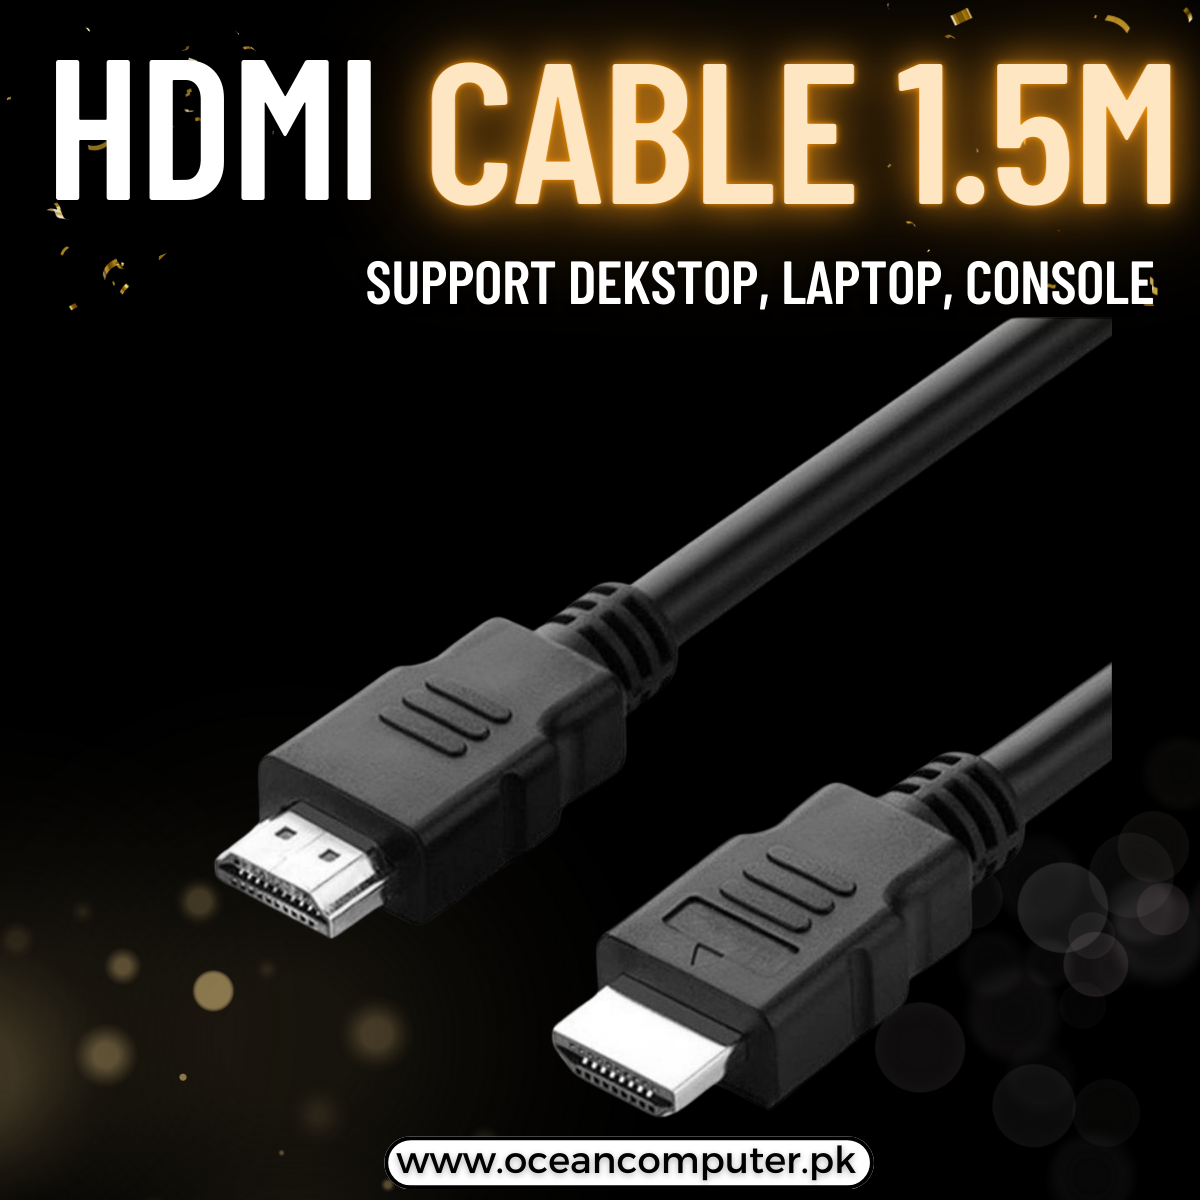 Orignal HDMI to HDMI Cable 1.5 M For Dekstop and Laptop And Console